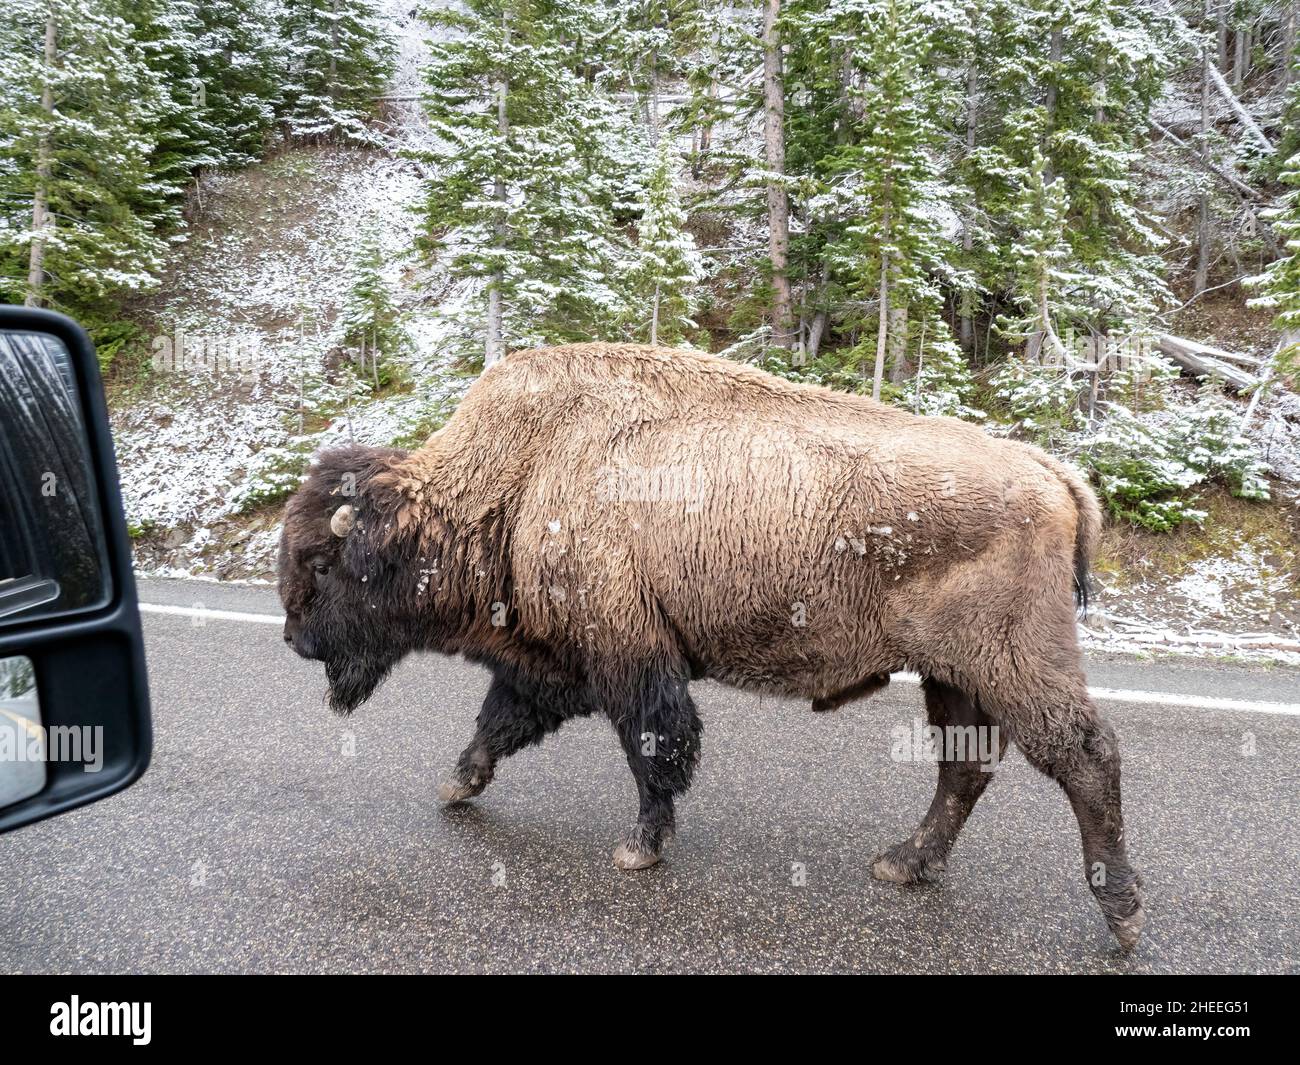 Adult bison, Bison bison, on the highway in snow in Yellowstone National Park, Wyoming. Stock Photo